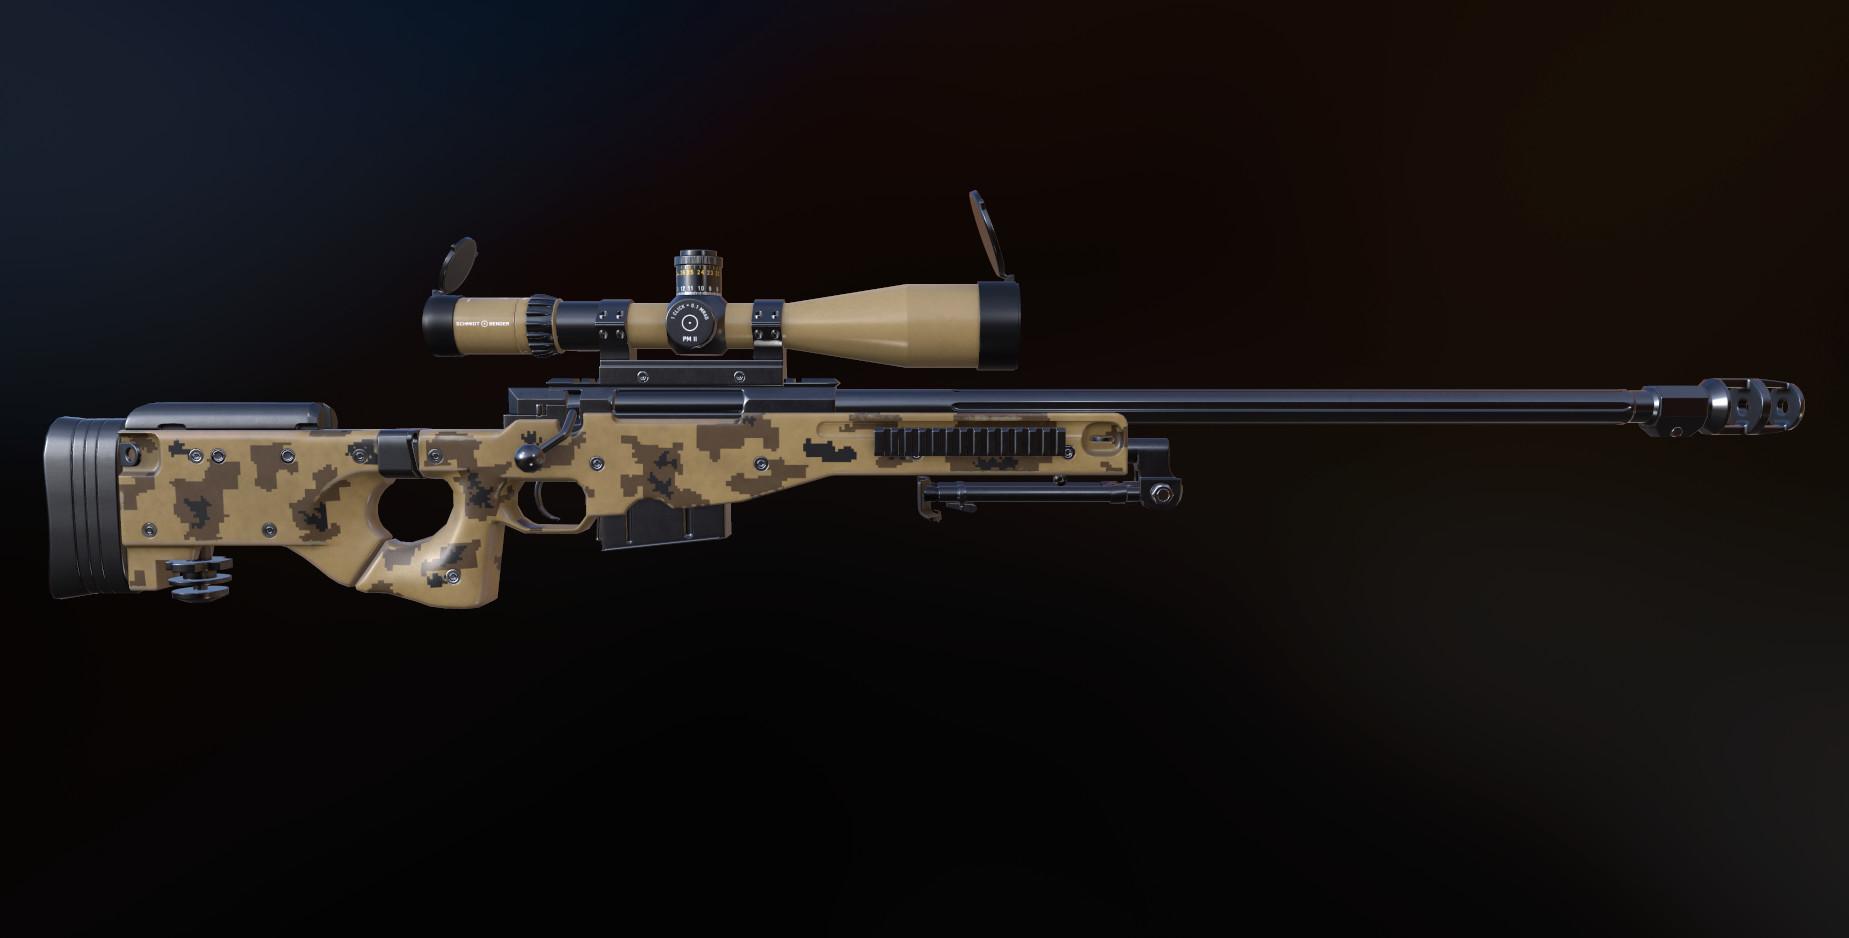 Awp cannons kg tr фото 107